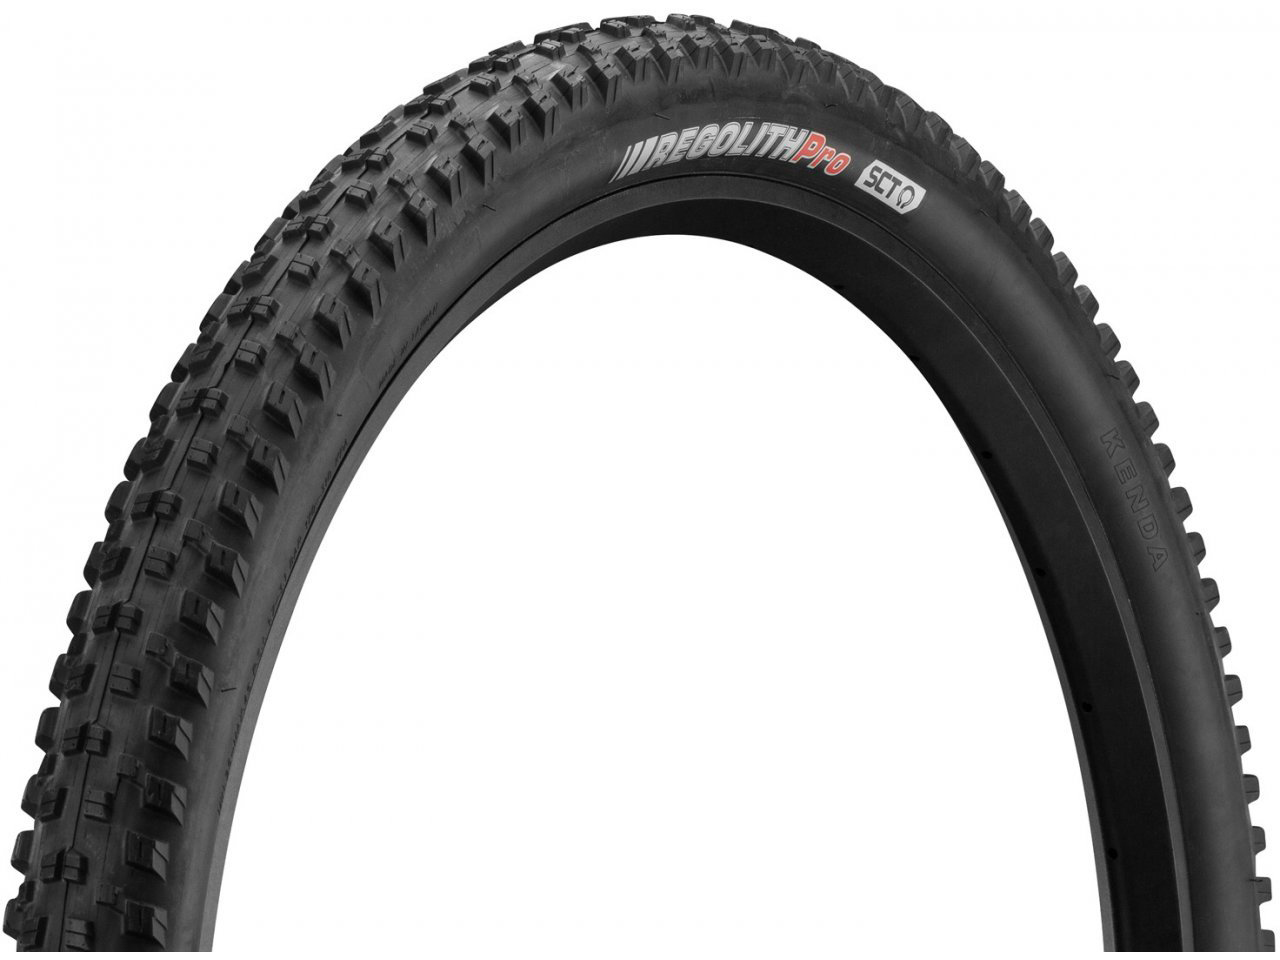 Vittoria Mazza TLR 2fold 27.5x2.4 4c G2.0 11A00279 Components Tires MTB 27 5 for sale online 